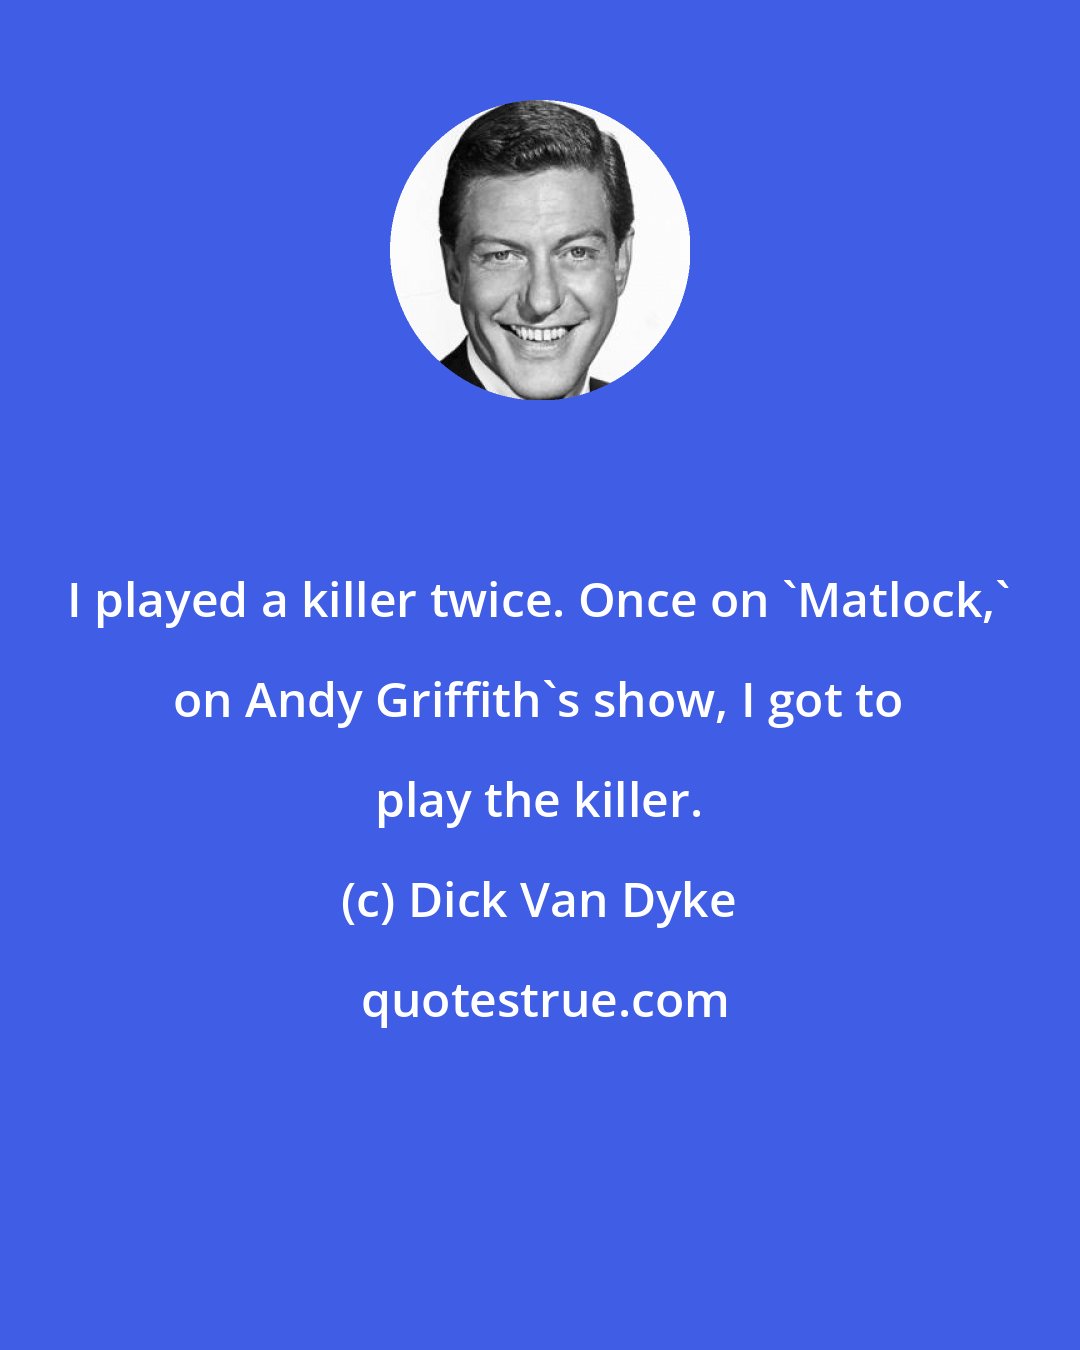 Dick Van Dyke: I played a killer twice. Once on 'Matlock,' on Andy Griffith's show, I got to play the killer.